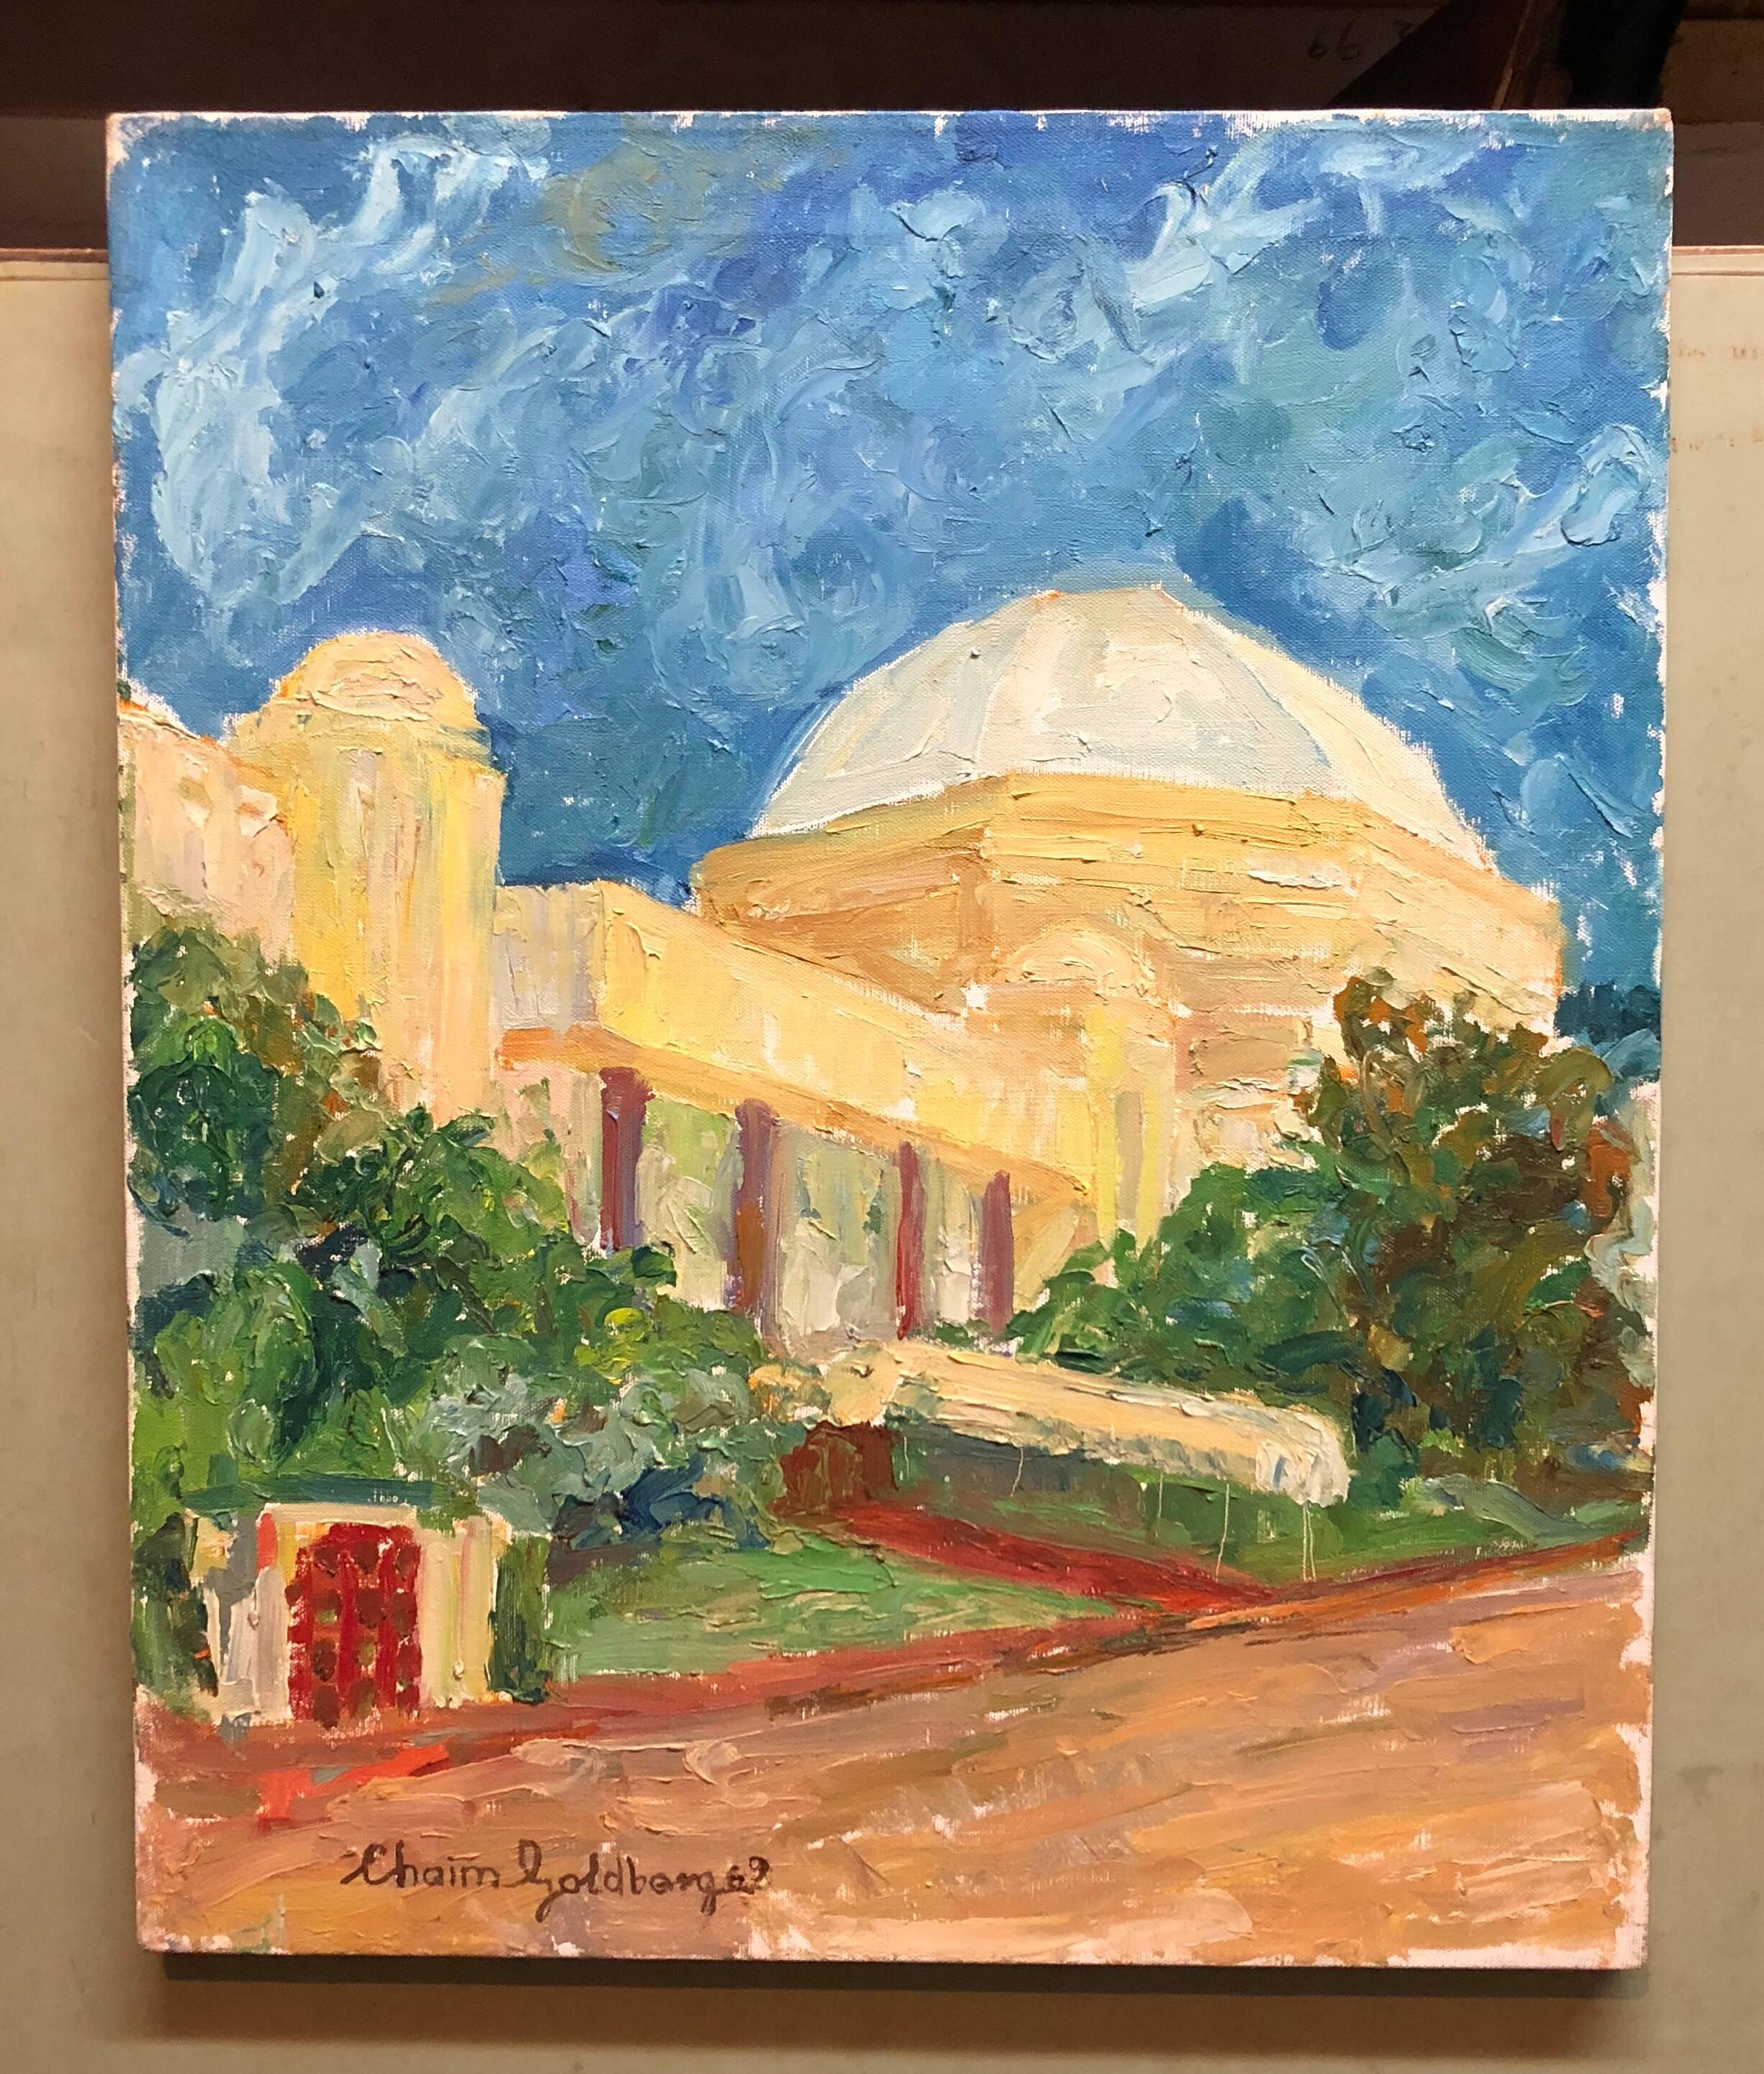 Painting of Jewish Temple in Miami Beach 
Modeled after the Great Synagogue in Oran, Algeria, it endures as an historical landmark in the Art-Deco cityscape of Miami Beach. Architect Morris Lapidus was the project architect for the school